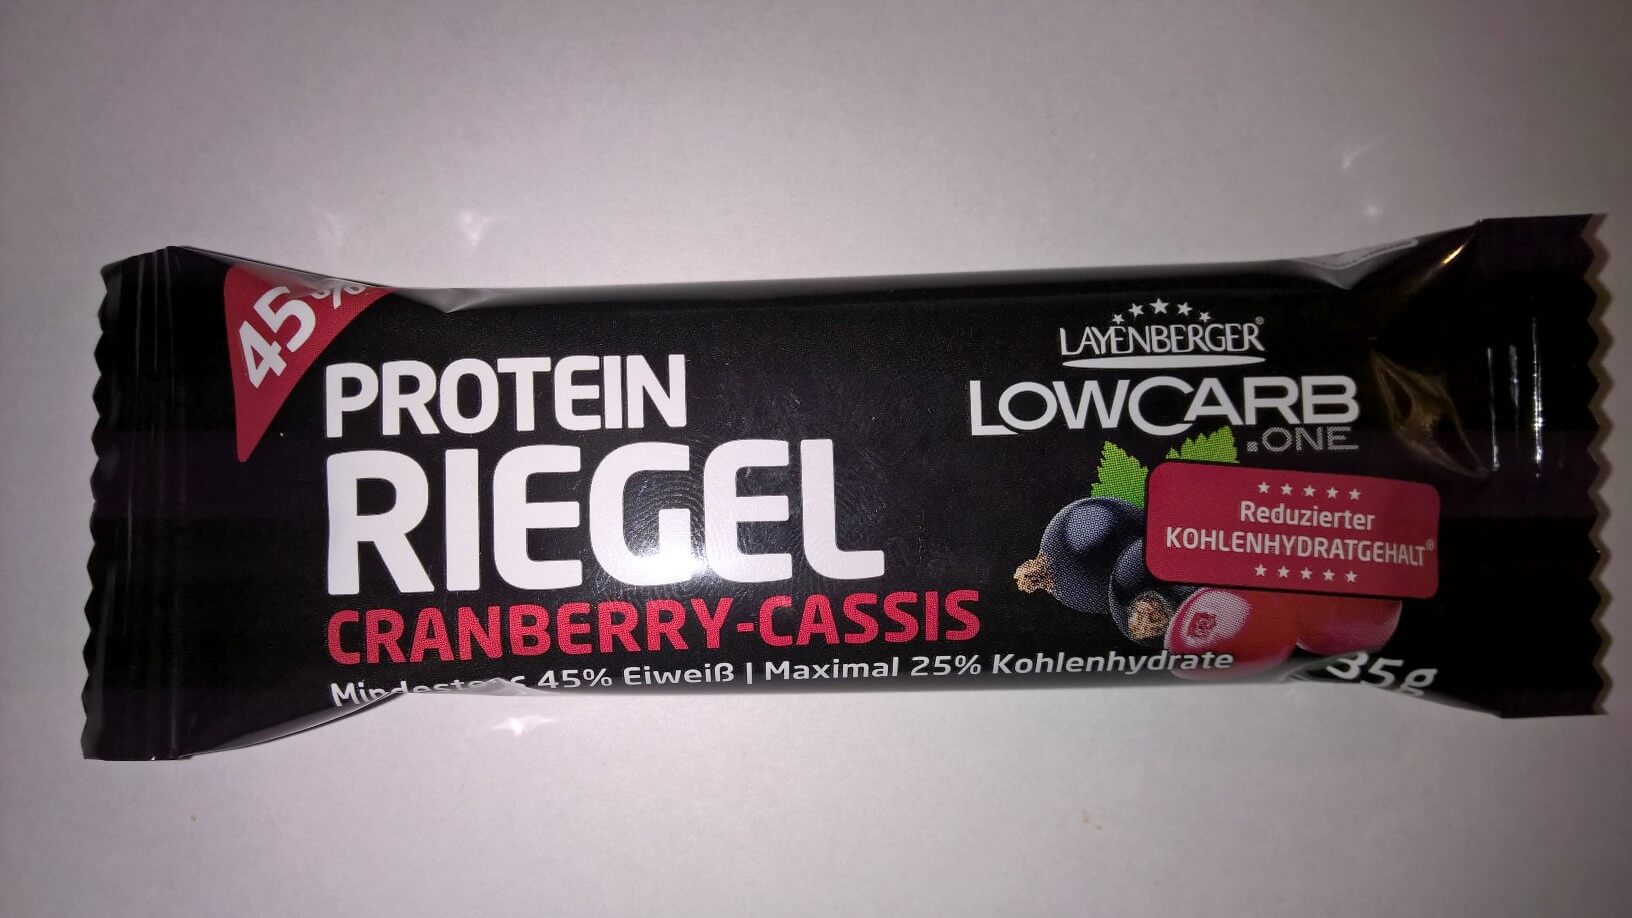 Layenberger LowCarb.one Proteinriegel Cranberry-Cassis